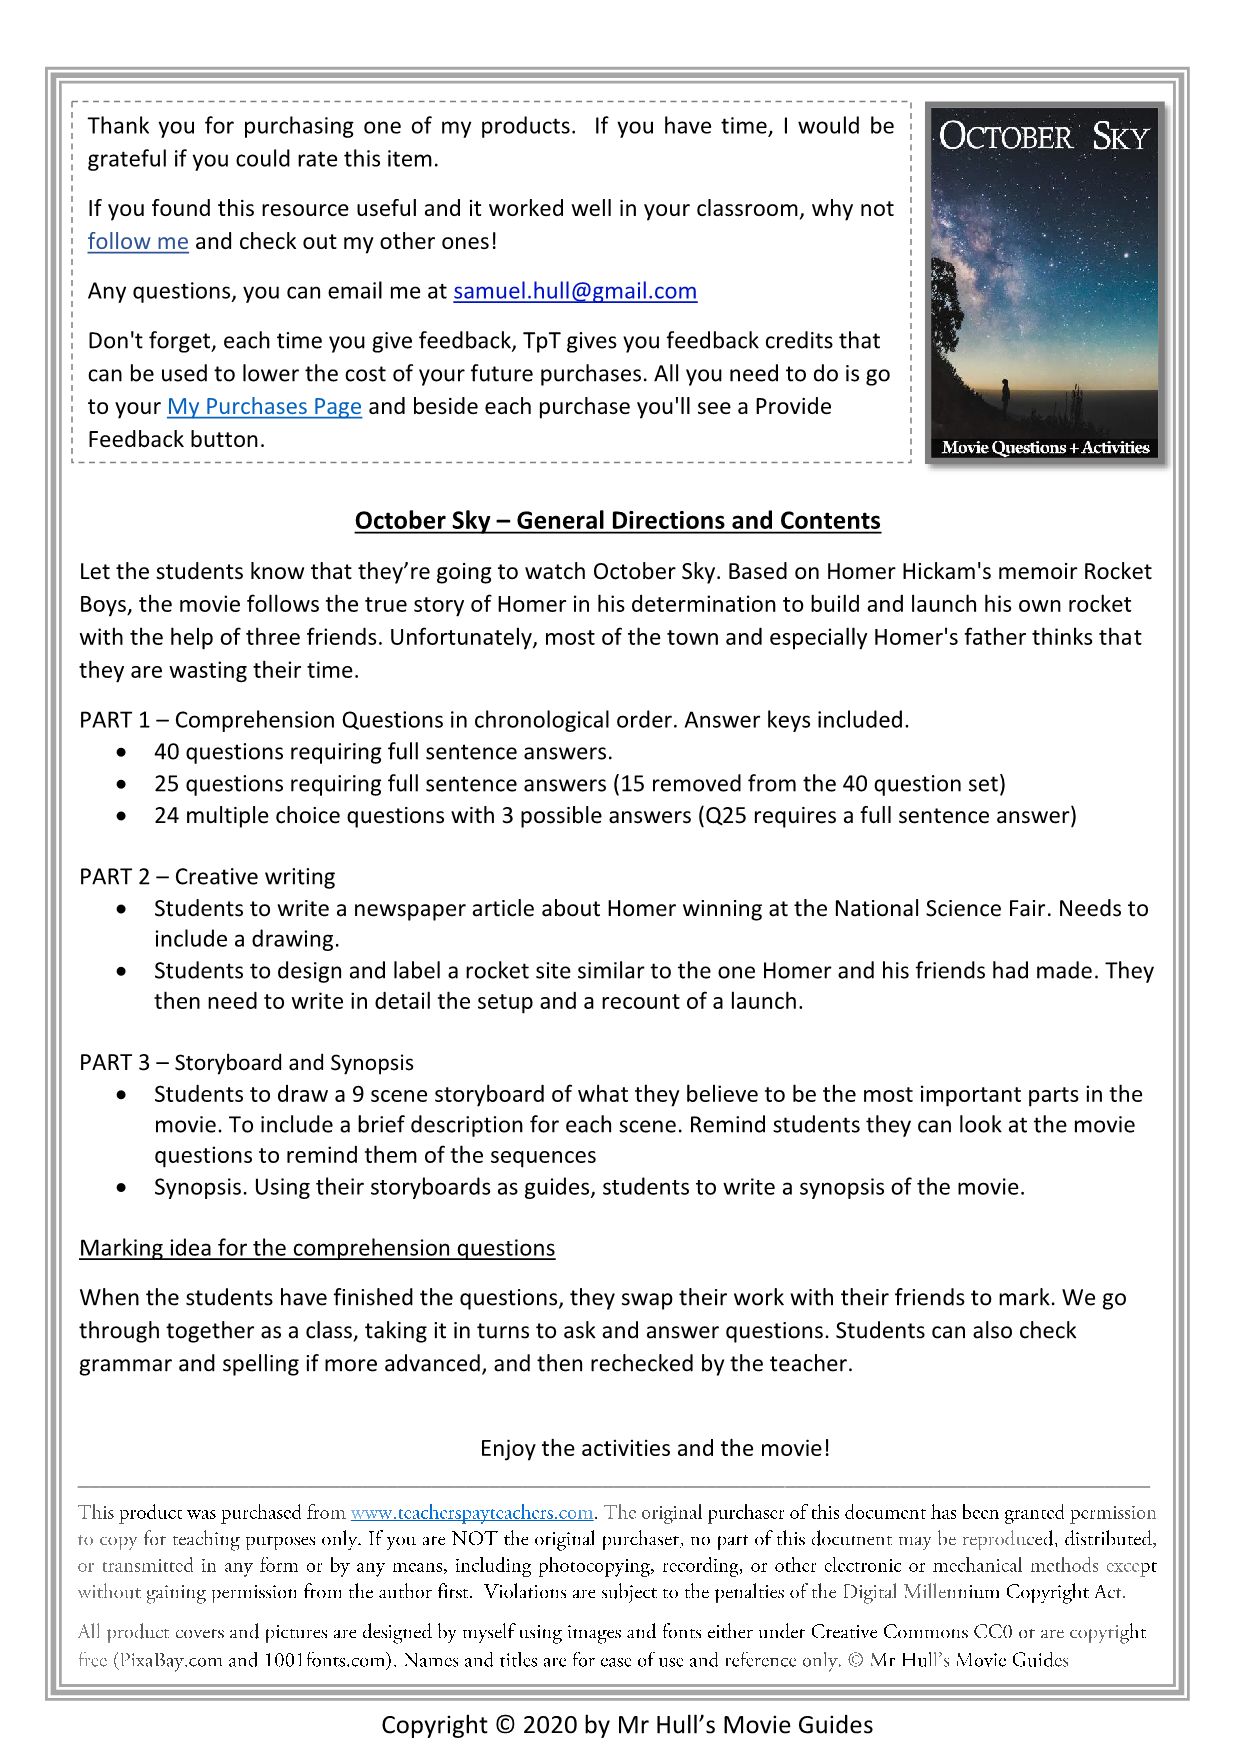 october-sky-movie-guide-activities-answer-keys-included-movie-guides-and-comprehension